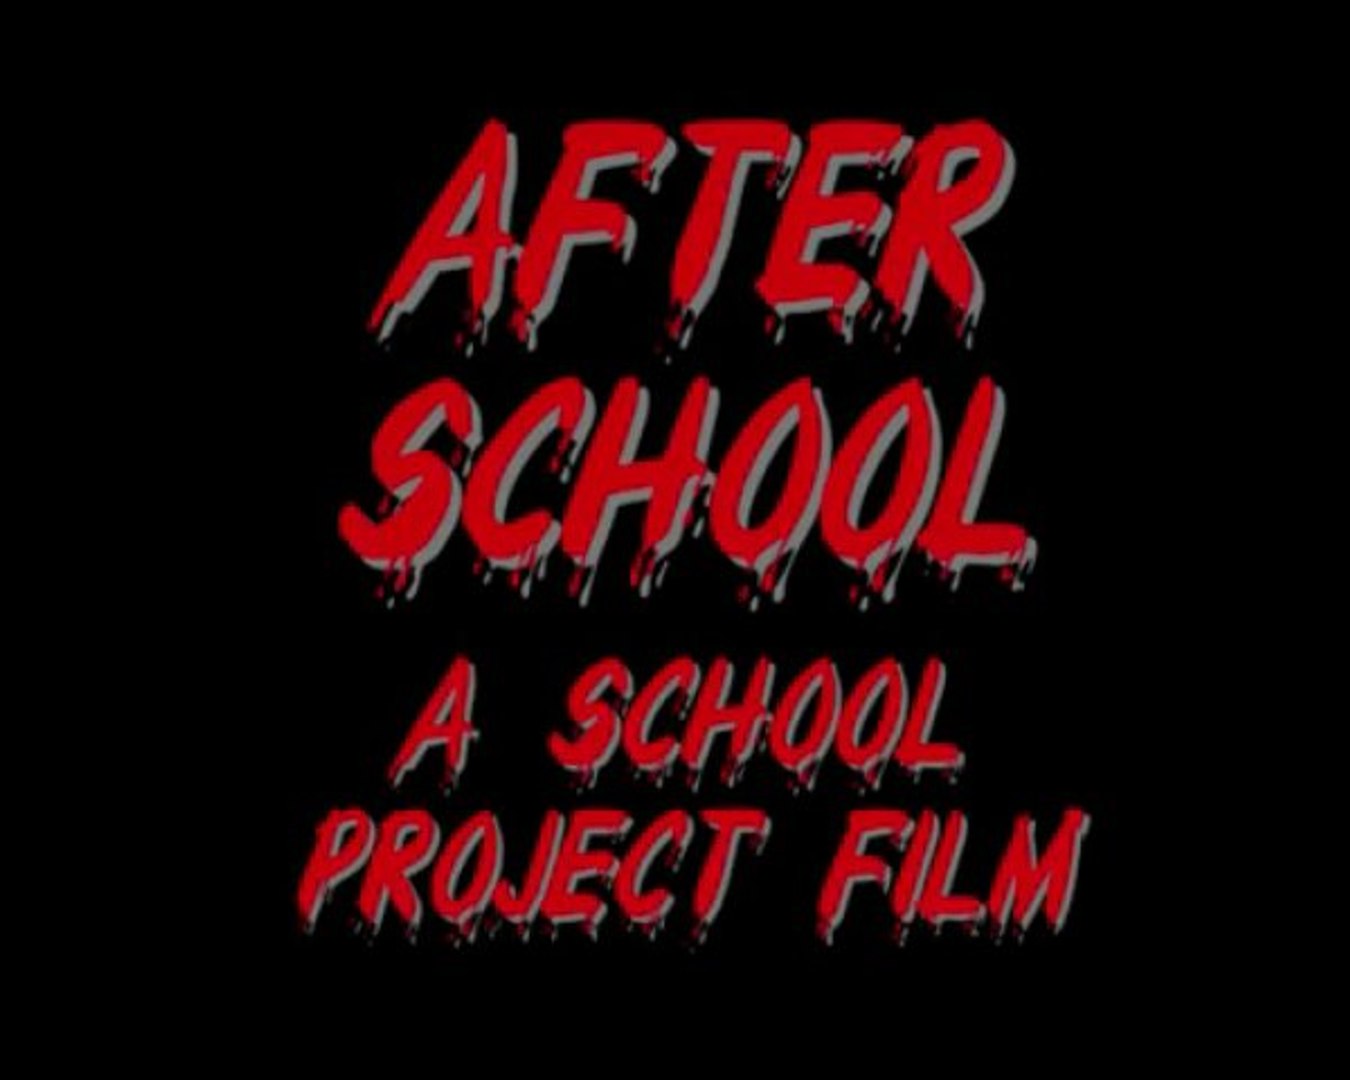 ⁣After School - a school project film